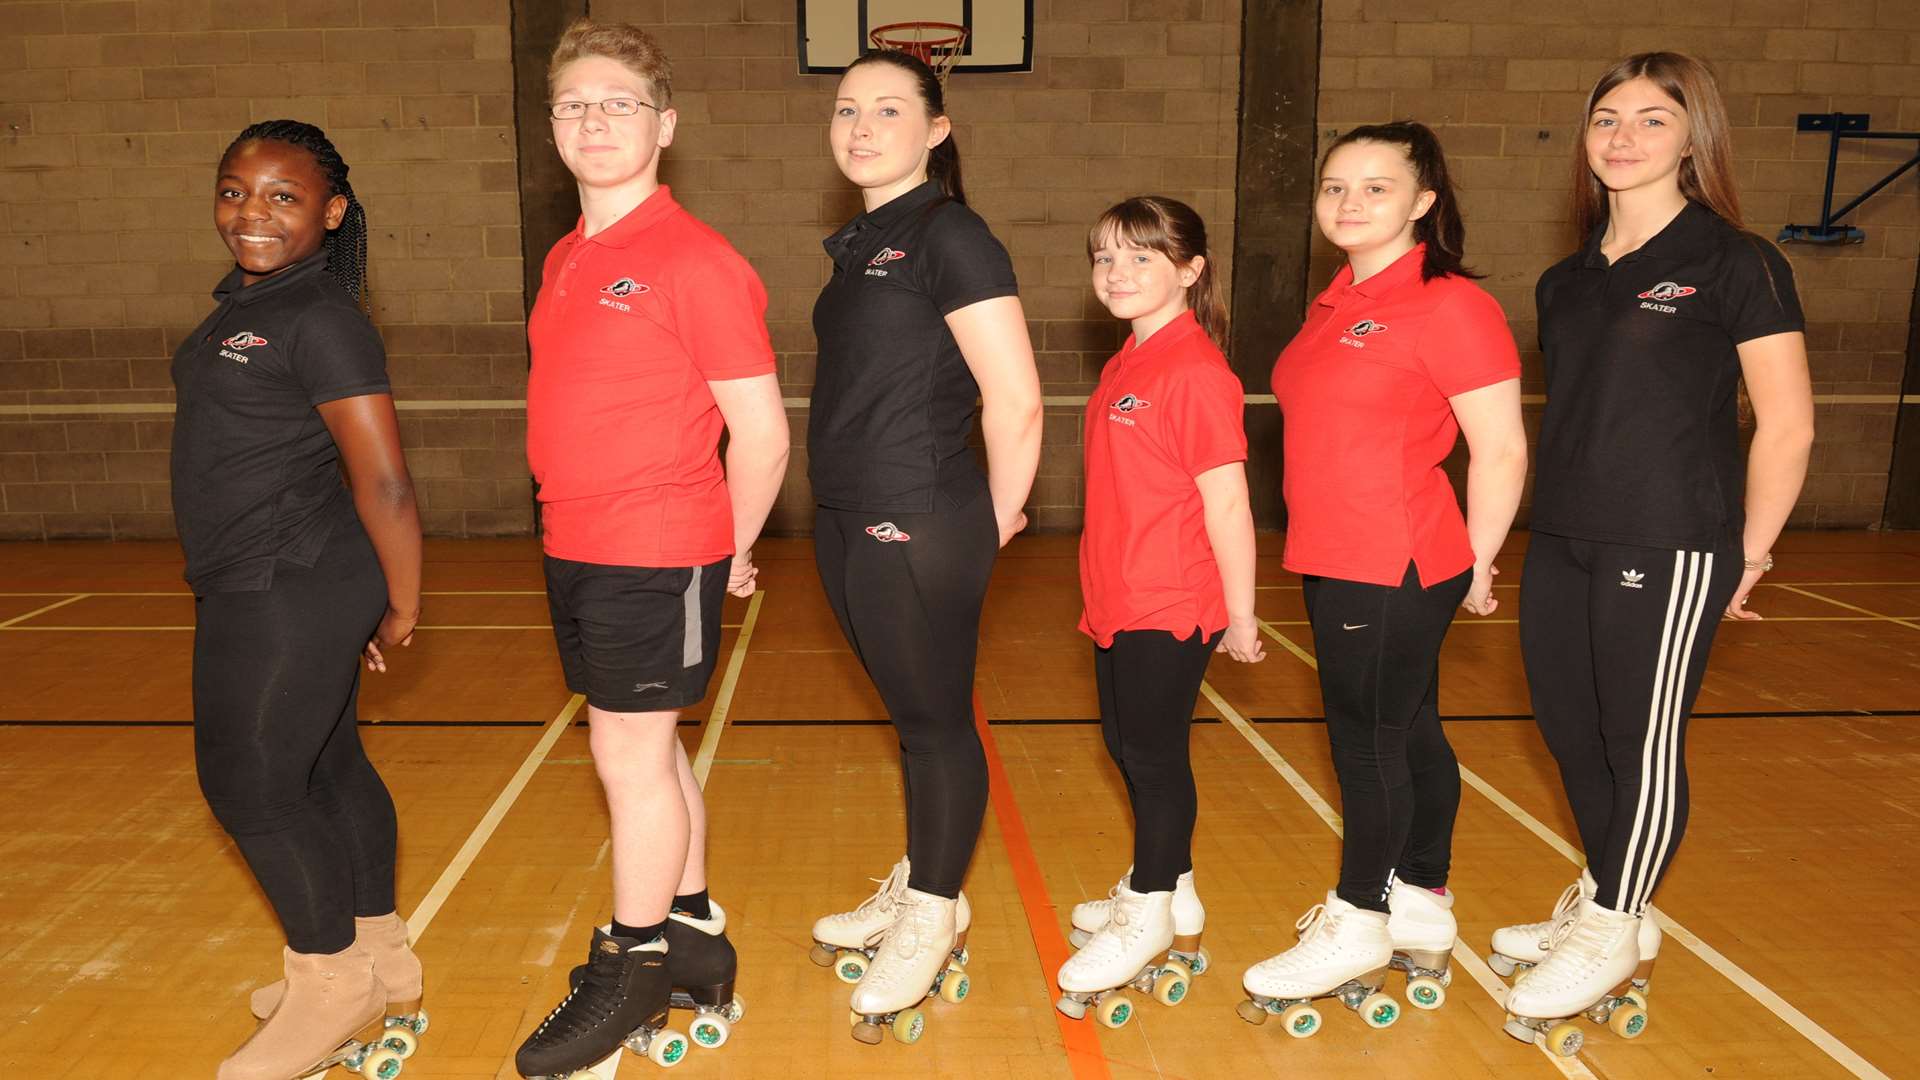 Members of the Medway Roller Dance Club.